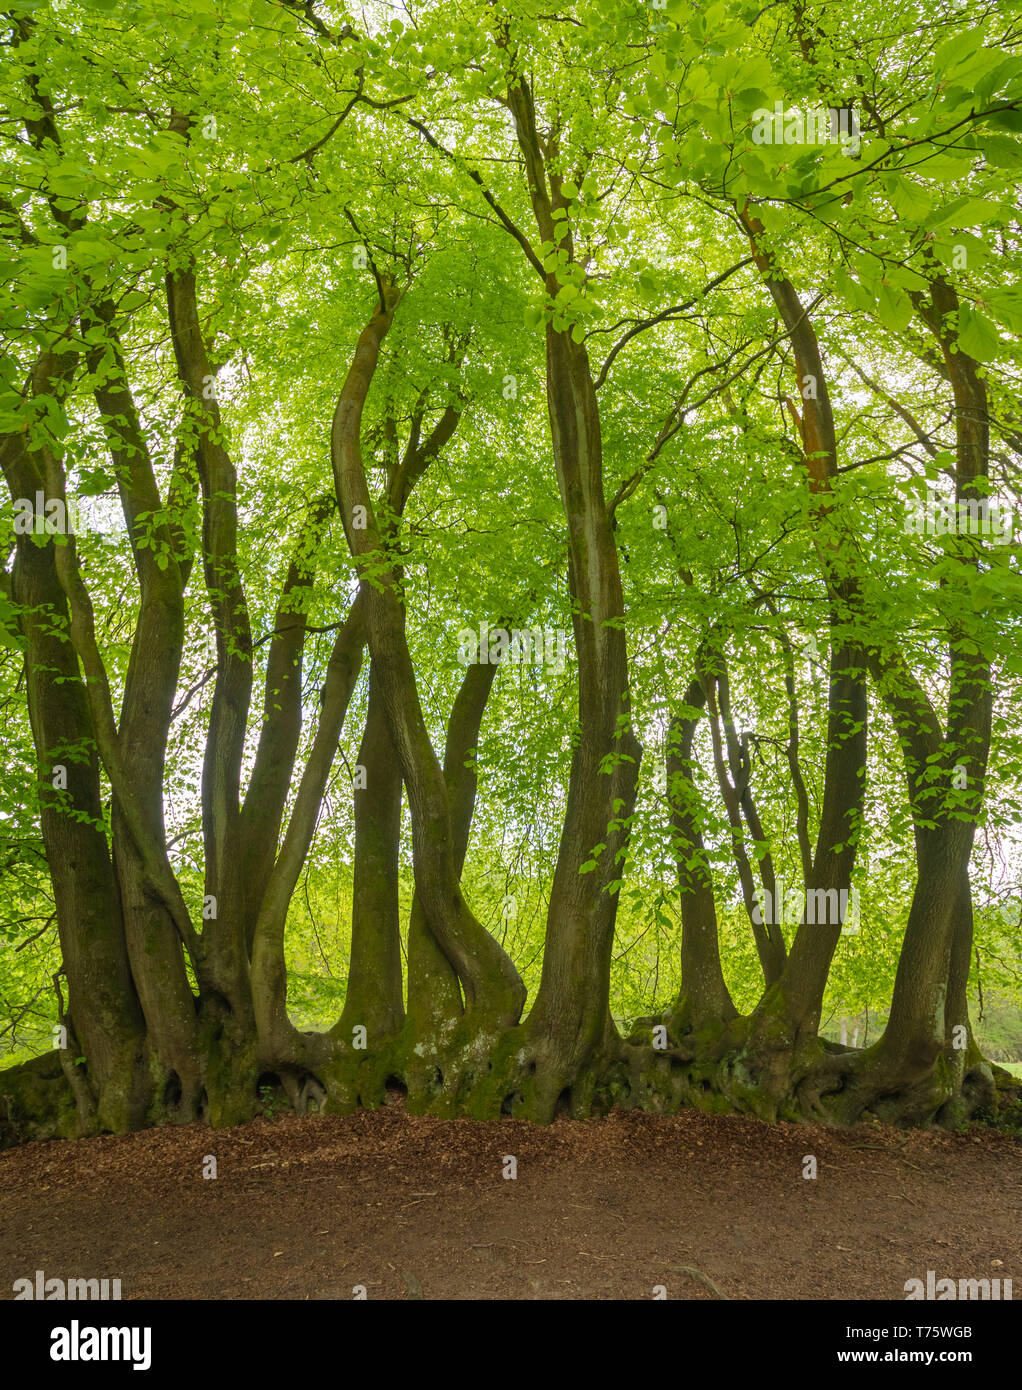 Ancient fused beech trees in May with fresh green spring leaves or foliage. Devil's Punchbowl, Surrey, UK Stock Photo